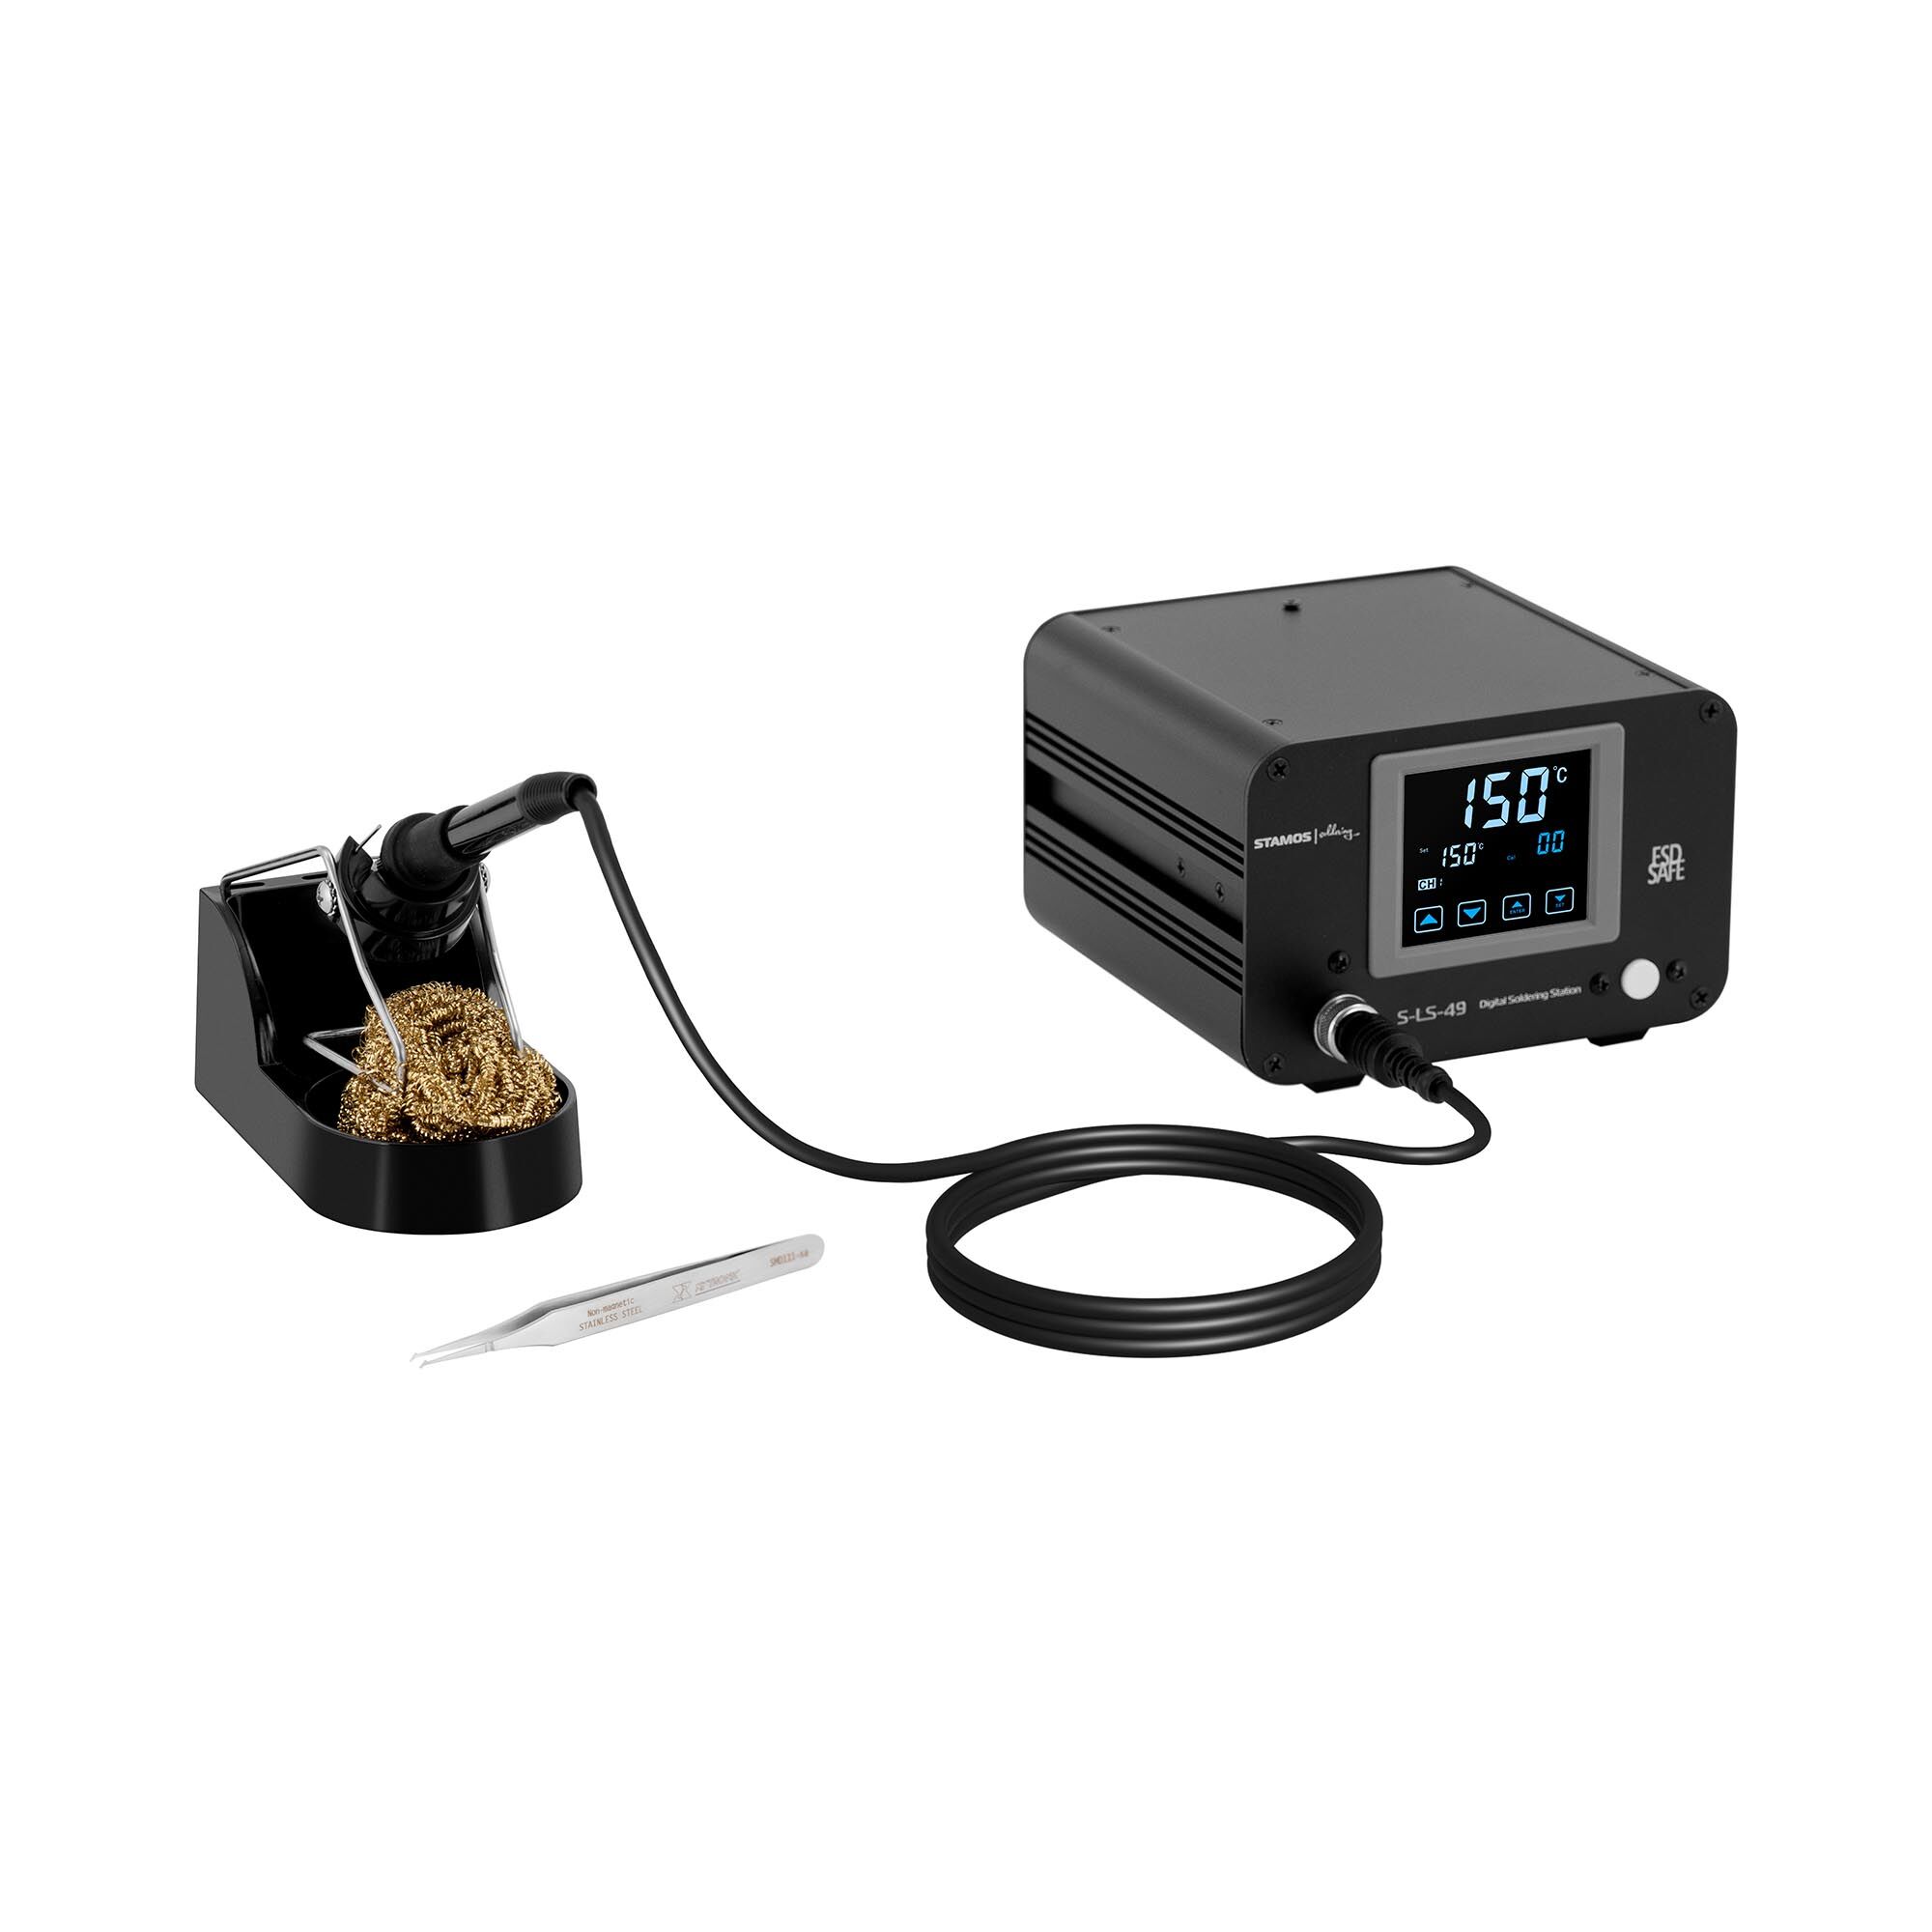 Stamos Soldering Soldering Station - digital - 100 W - LCD touch S-LS-49